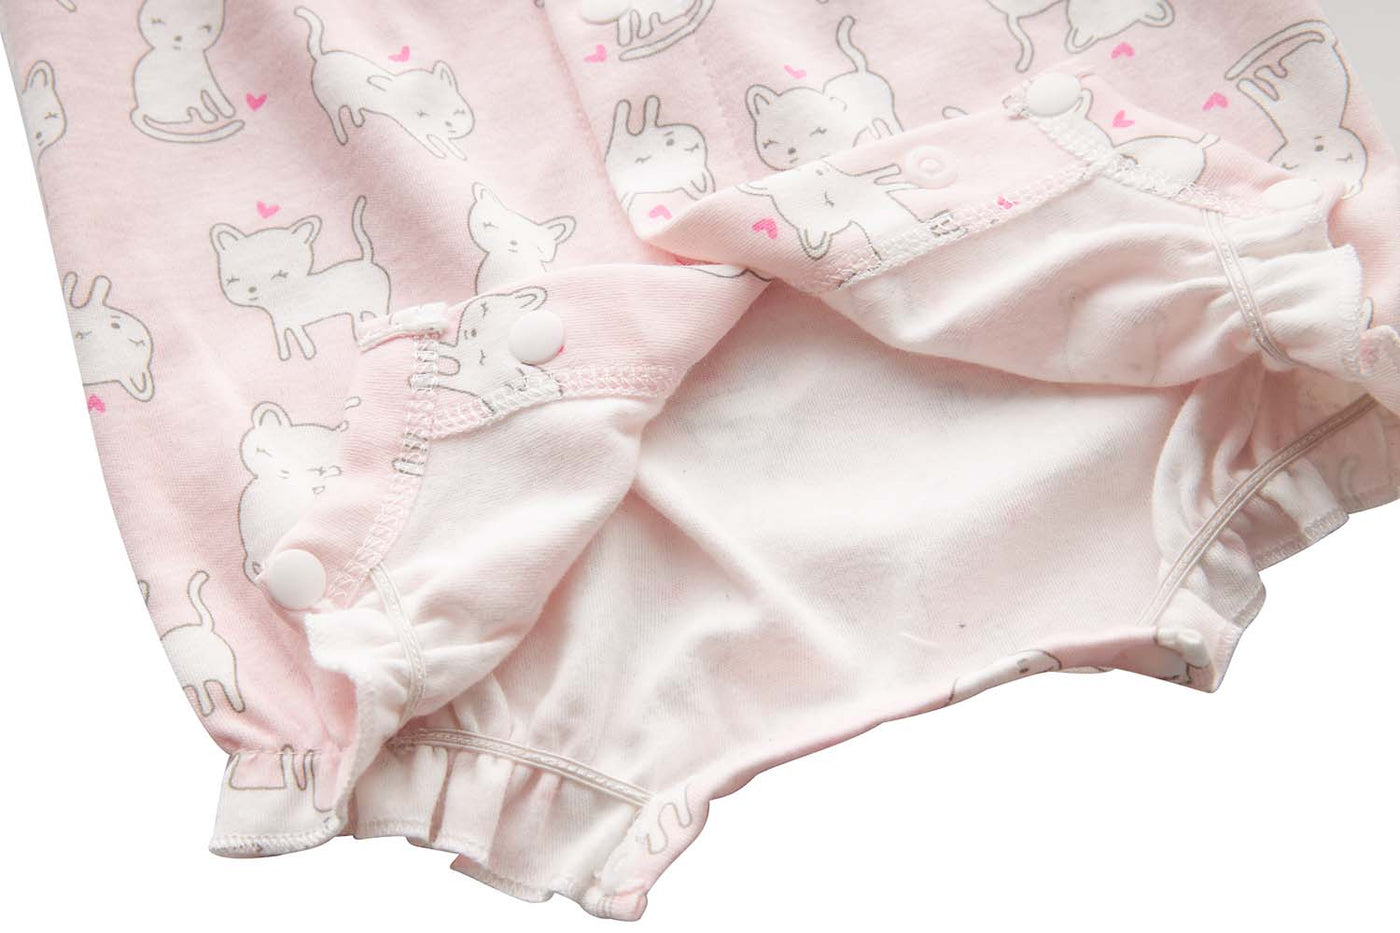 Baby Girl Pink w White Cats Romper - Little Kooma